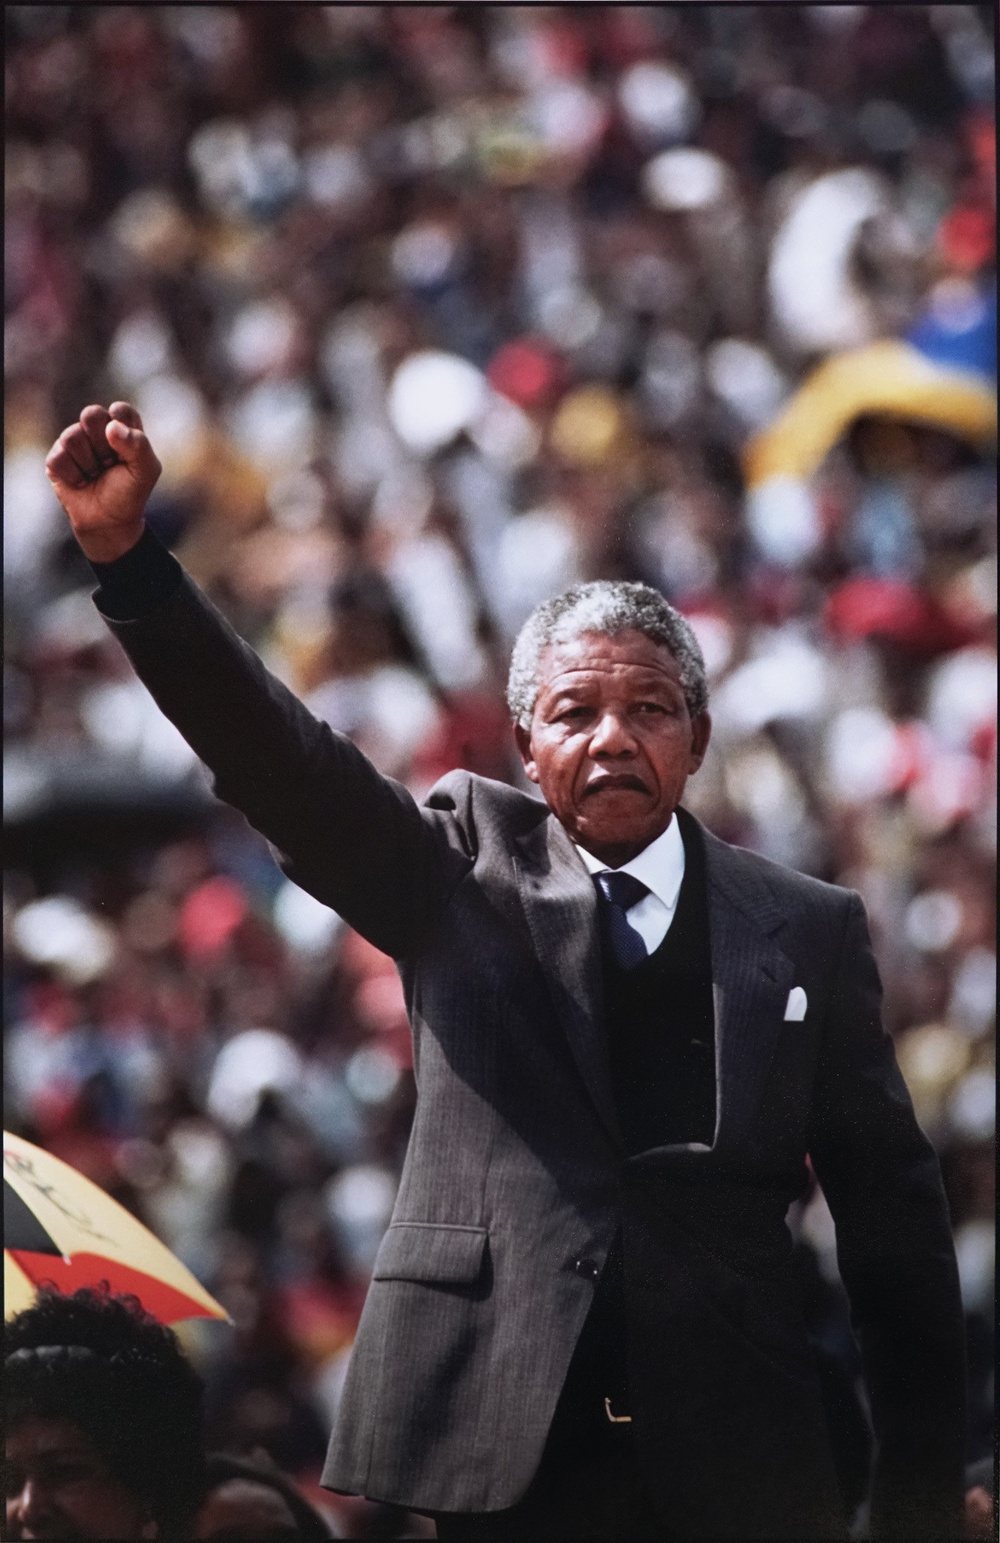 A color photograph of Nelson Mandela, a Black man with short grey hair, standing with his fist raised. Behind him, out of focus is a large crowd of people.